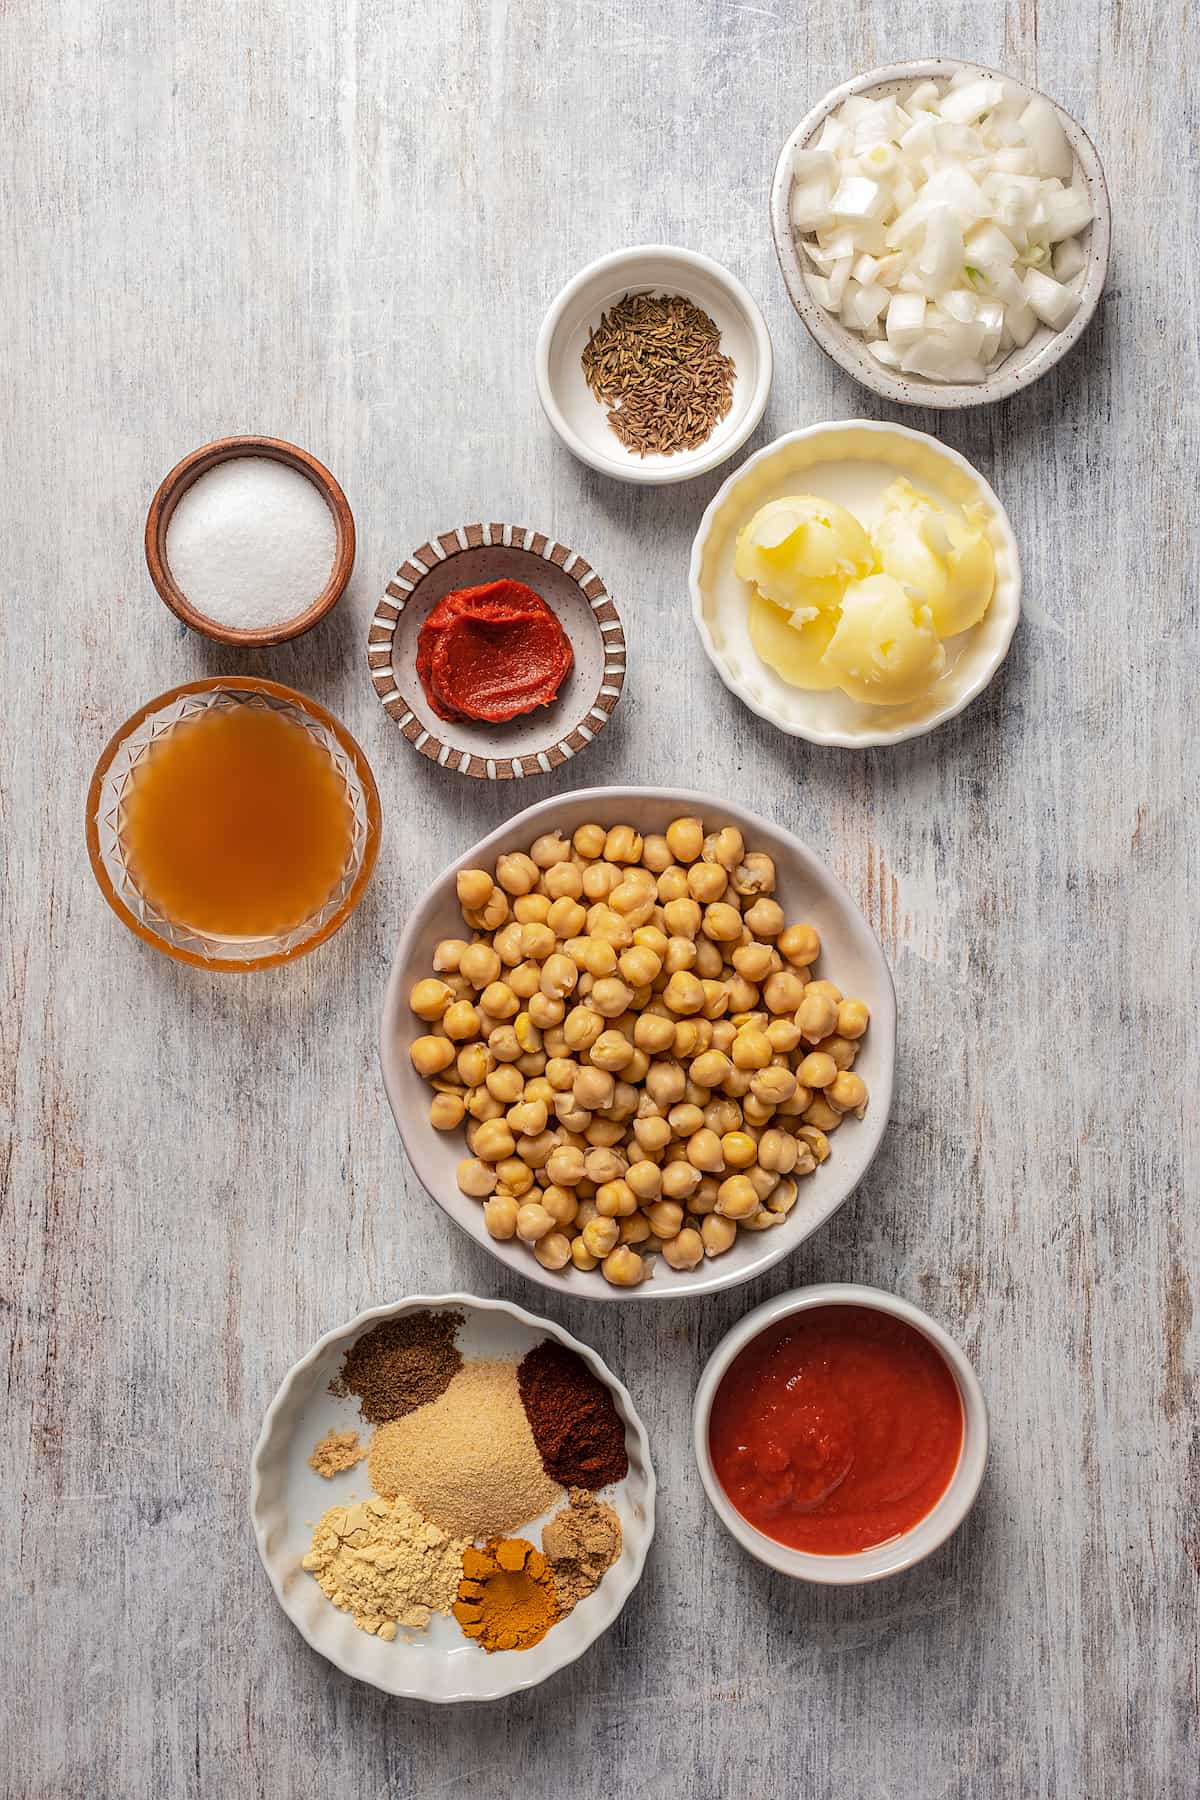 Ingredients for Indian samosa chaat.